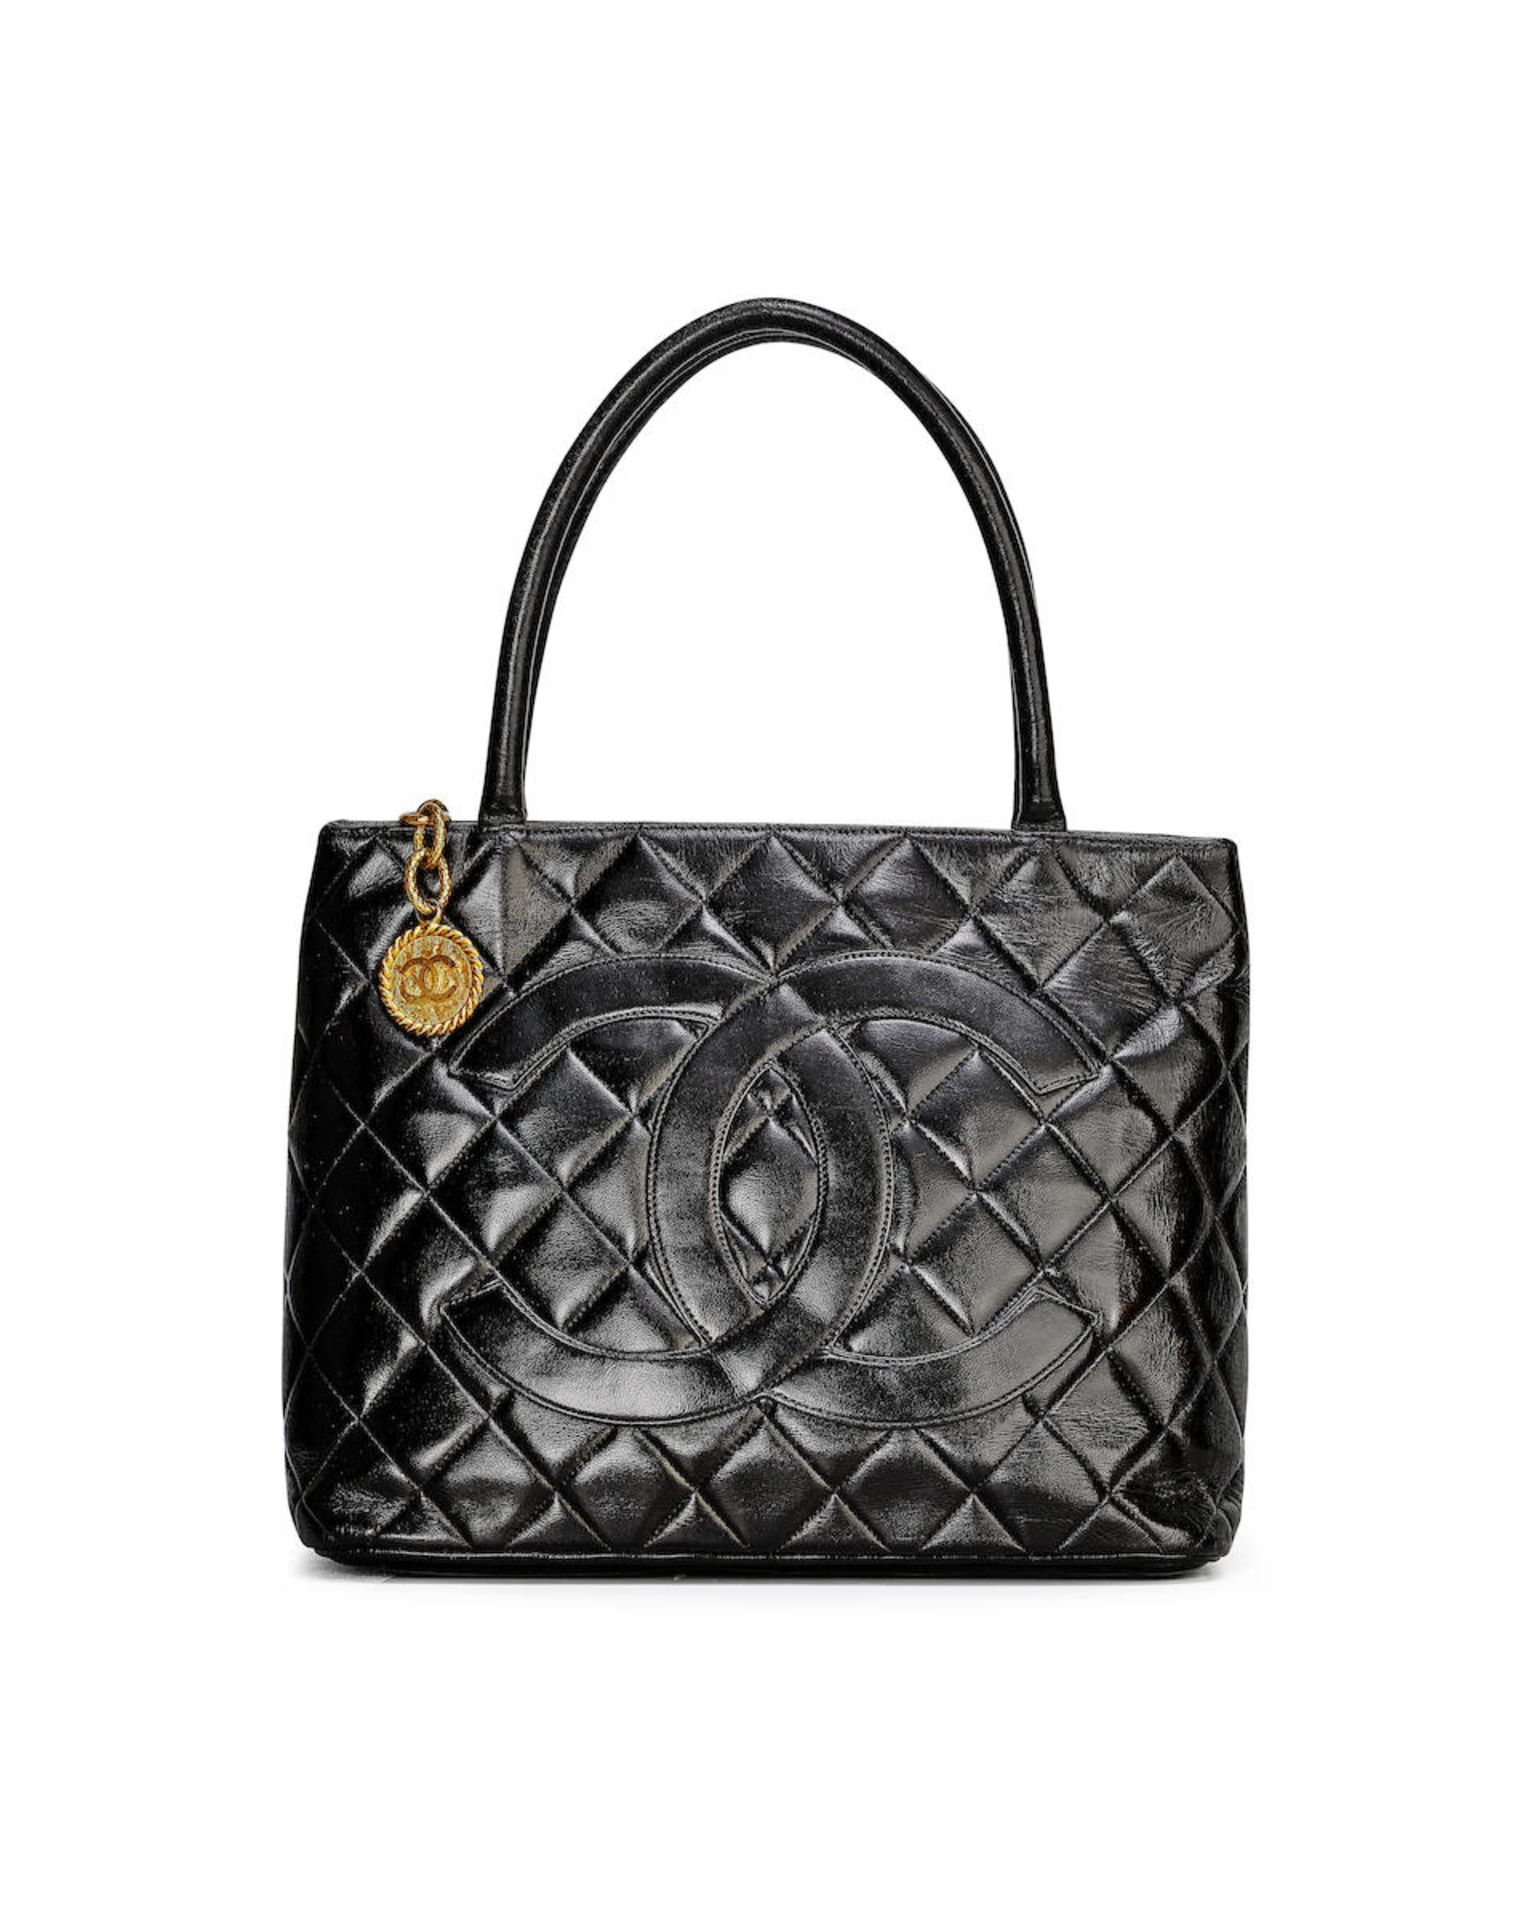 CHANEL: BLACK LAMBSKIN MEDALLION QUILTED TOTE BAG WITH GOLD TONED HARDWARE (Includes serial stic...